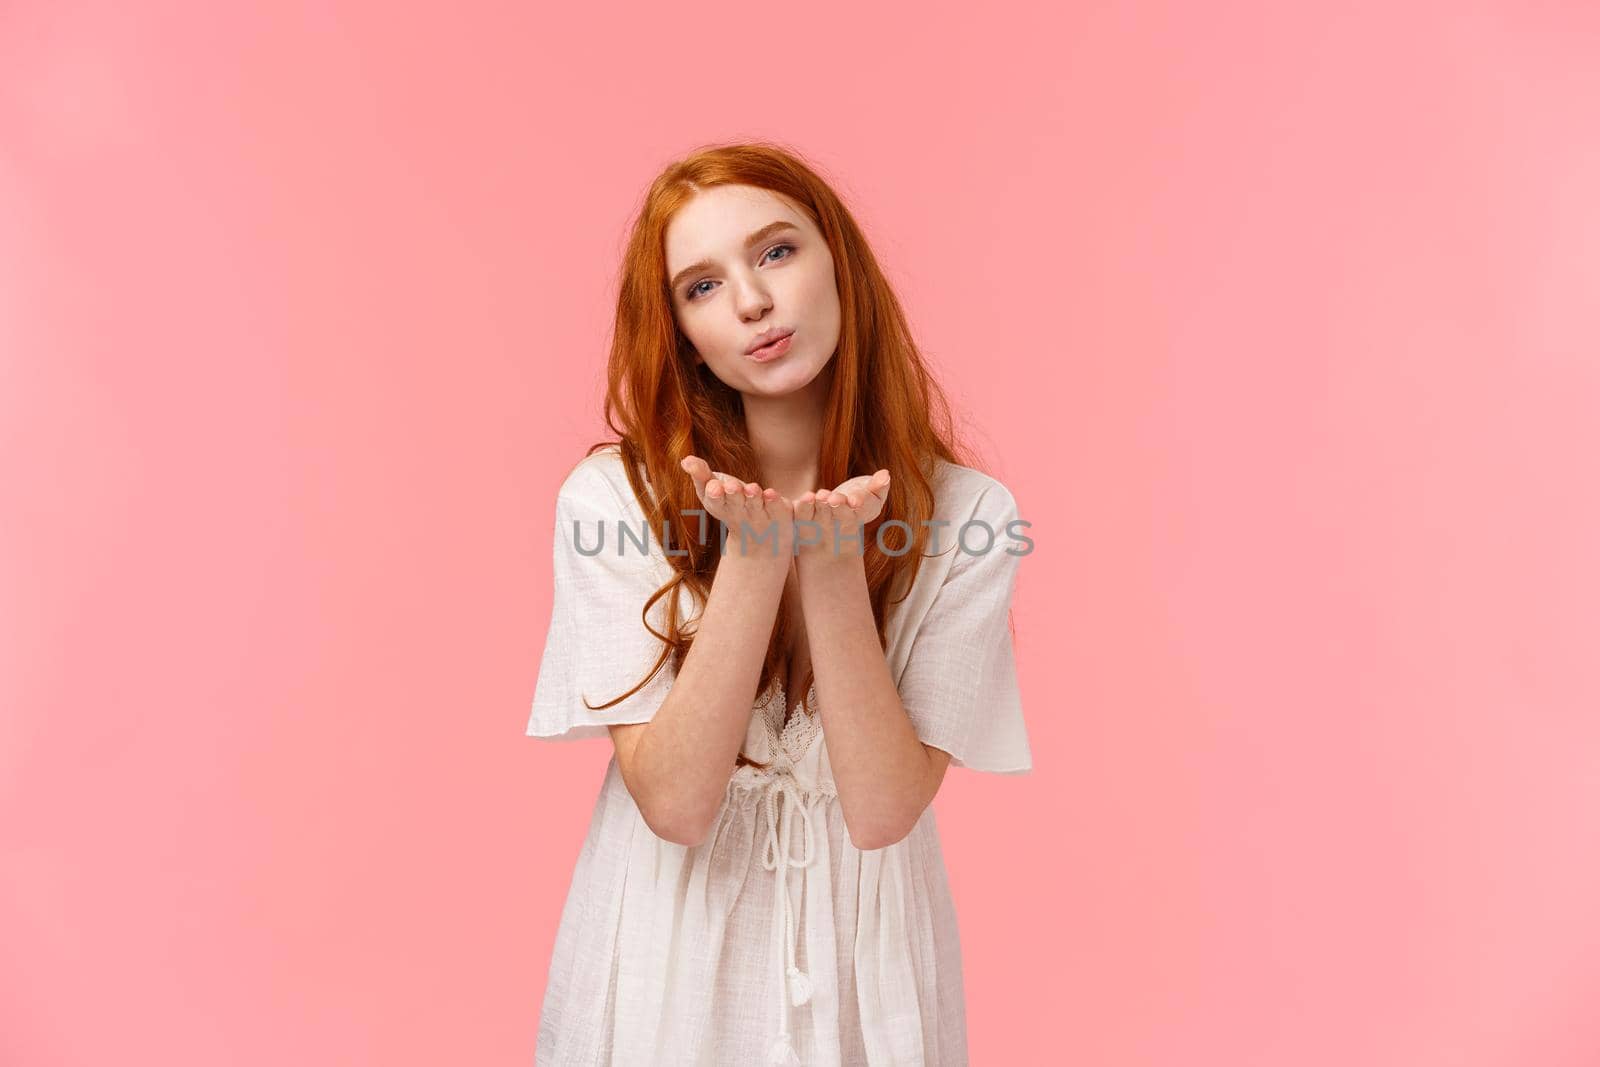 Waist-up portrait, cute and sensual, romantic feminine girl with red curly hair in white dress, bending and holding palms near folded lips, sending air kiss at camera, standing pink background.